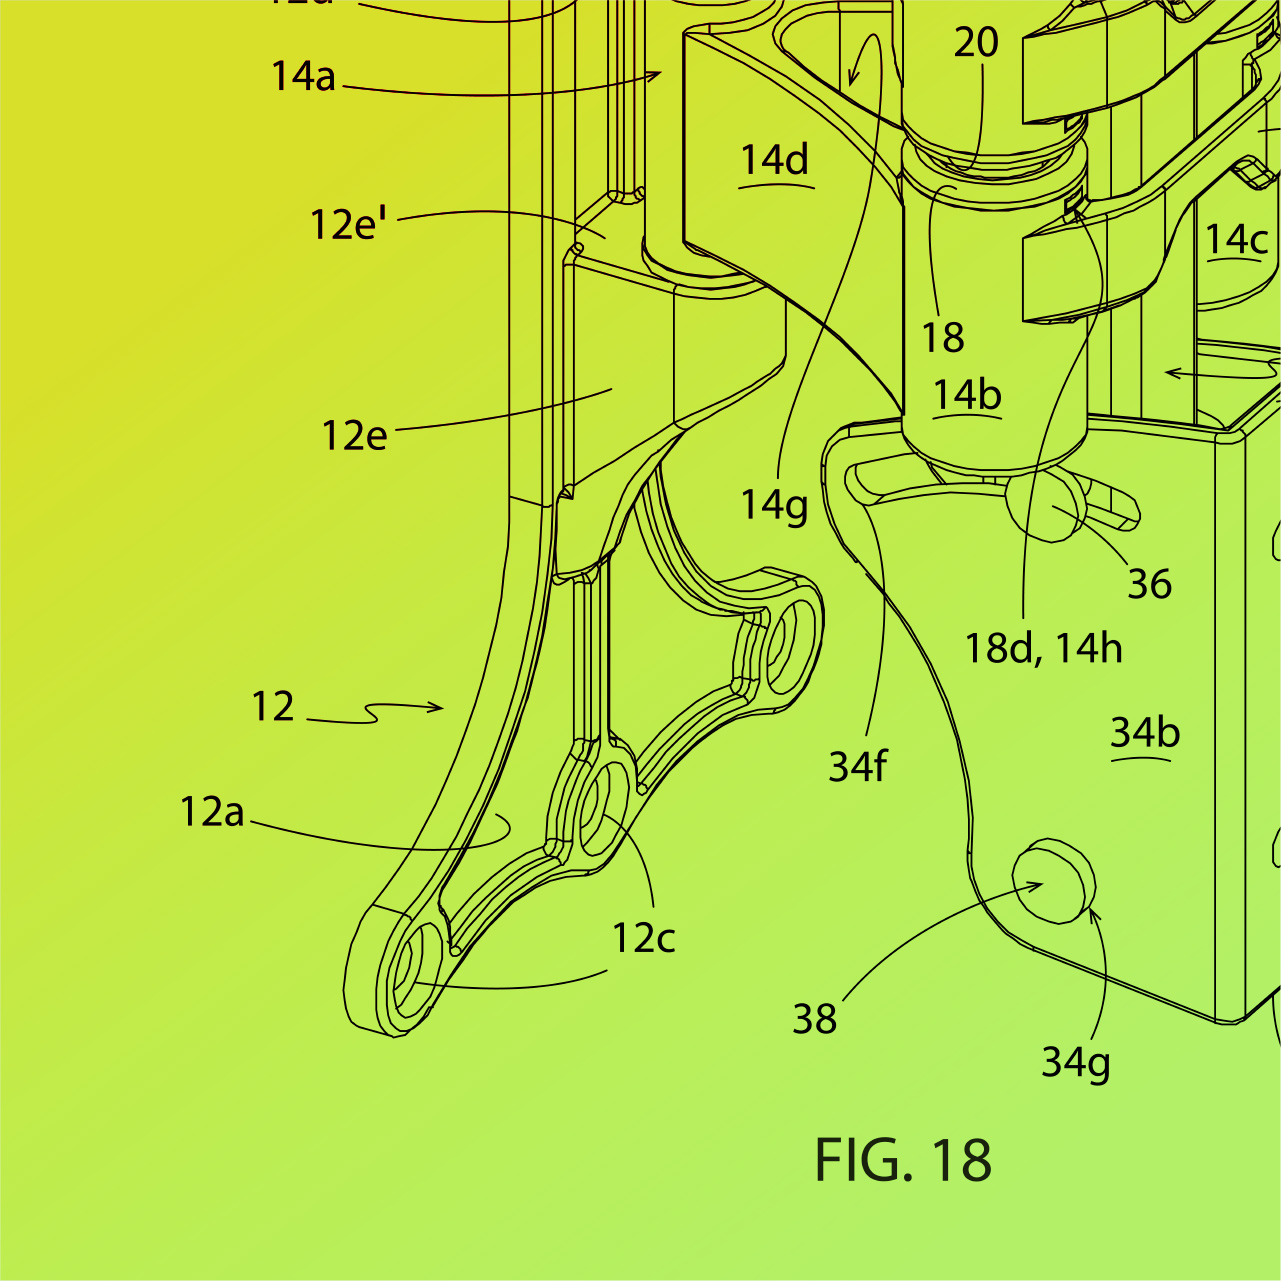 Patent Services - Utility Patent Illustrations